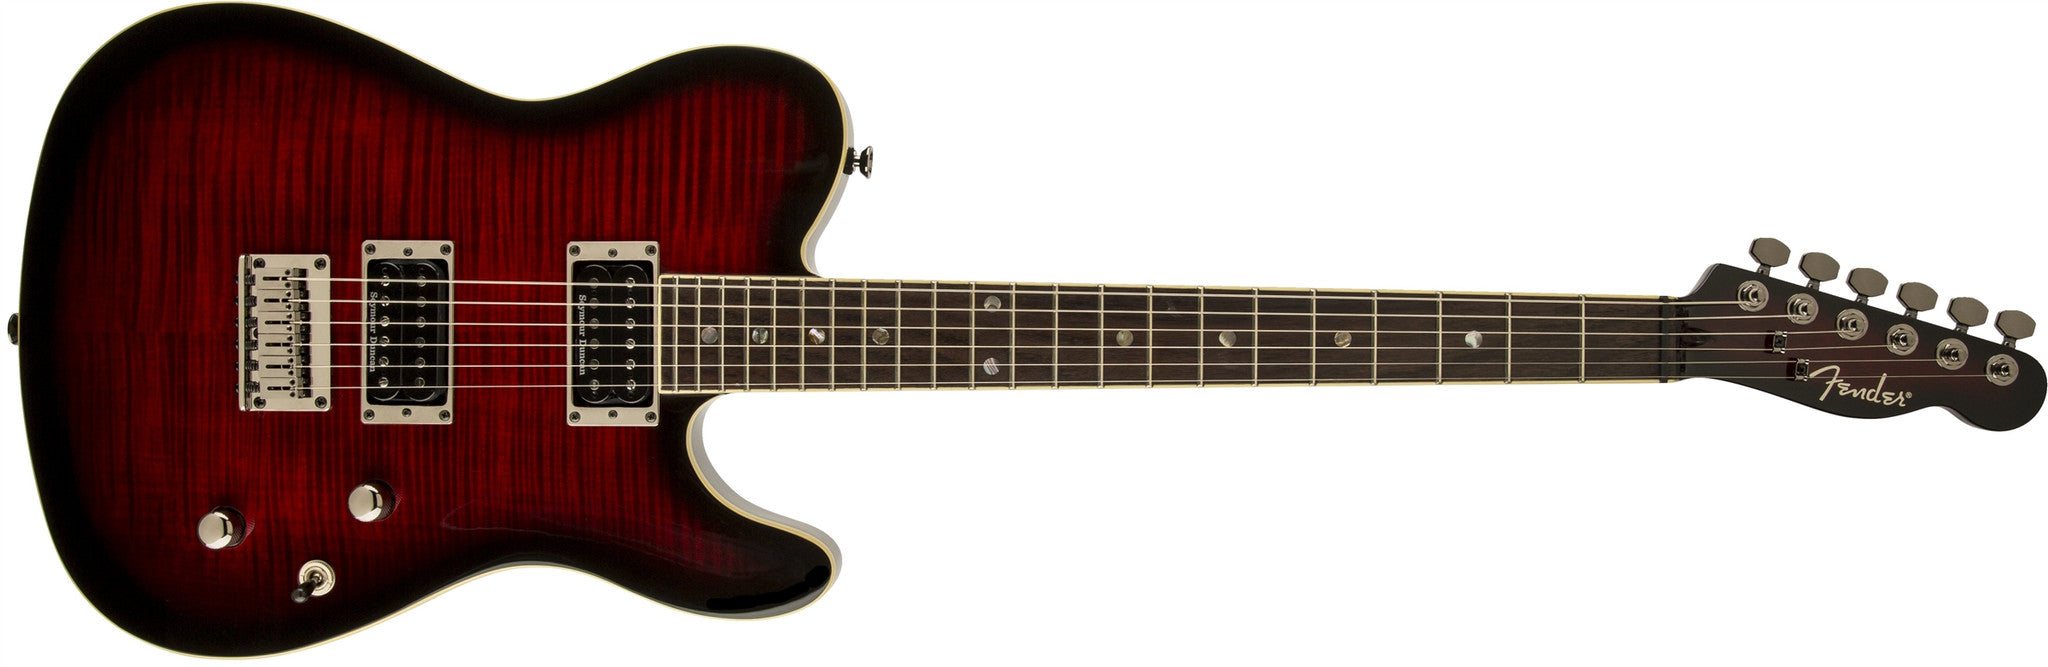 Fender Special Edition Custom Telecaster FMT HH, Rosewood Fingerboard, Black Cherry Burst 262000561 - L.A. Music - Canada's Favourite Music Store!